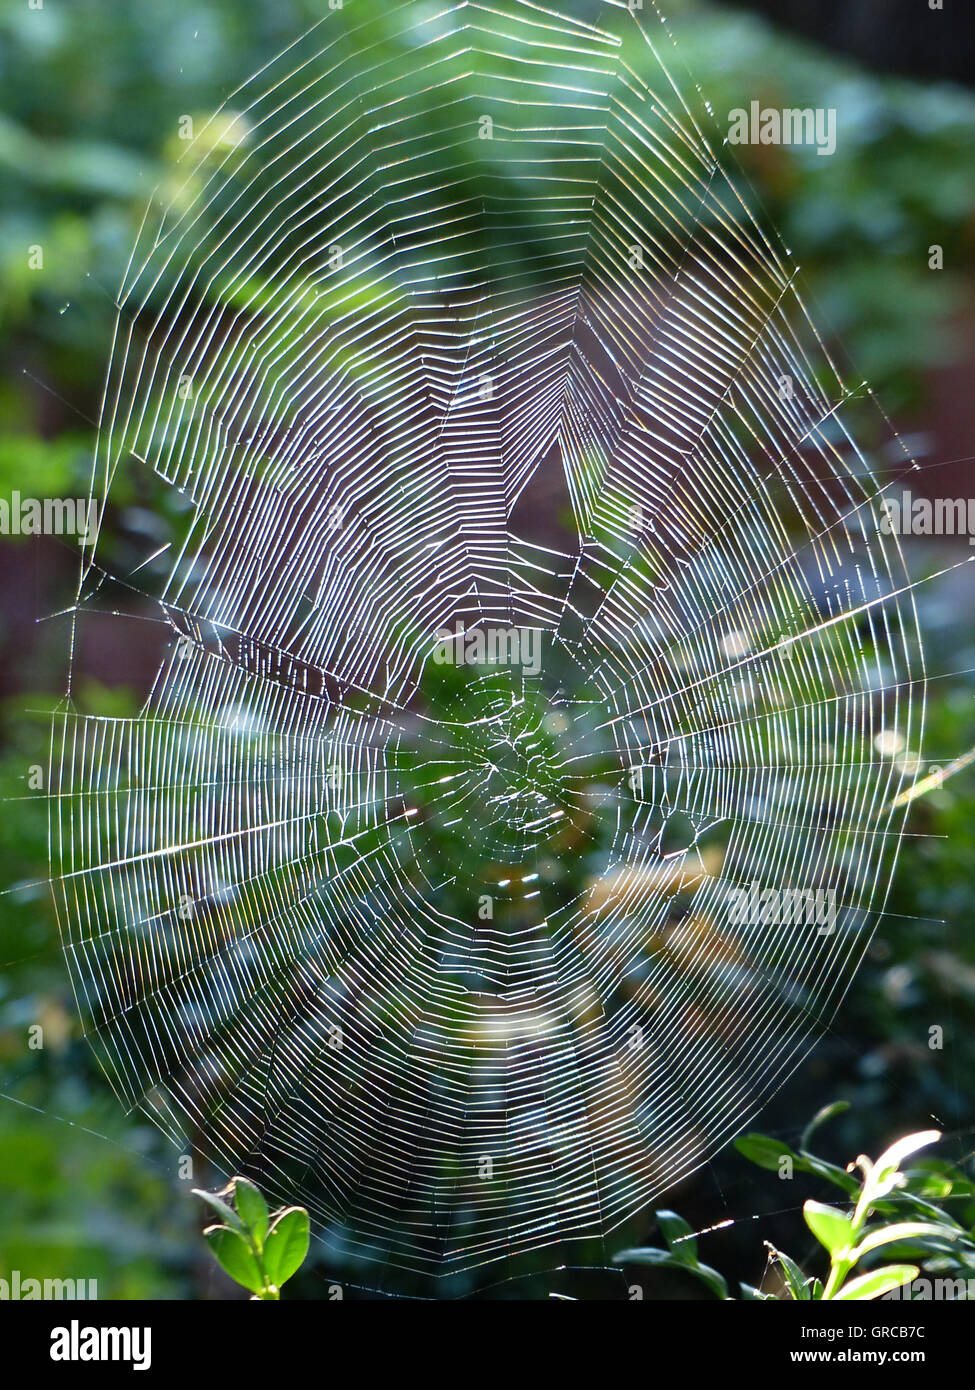 Spiders Web In Green Nature Banque D'Images